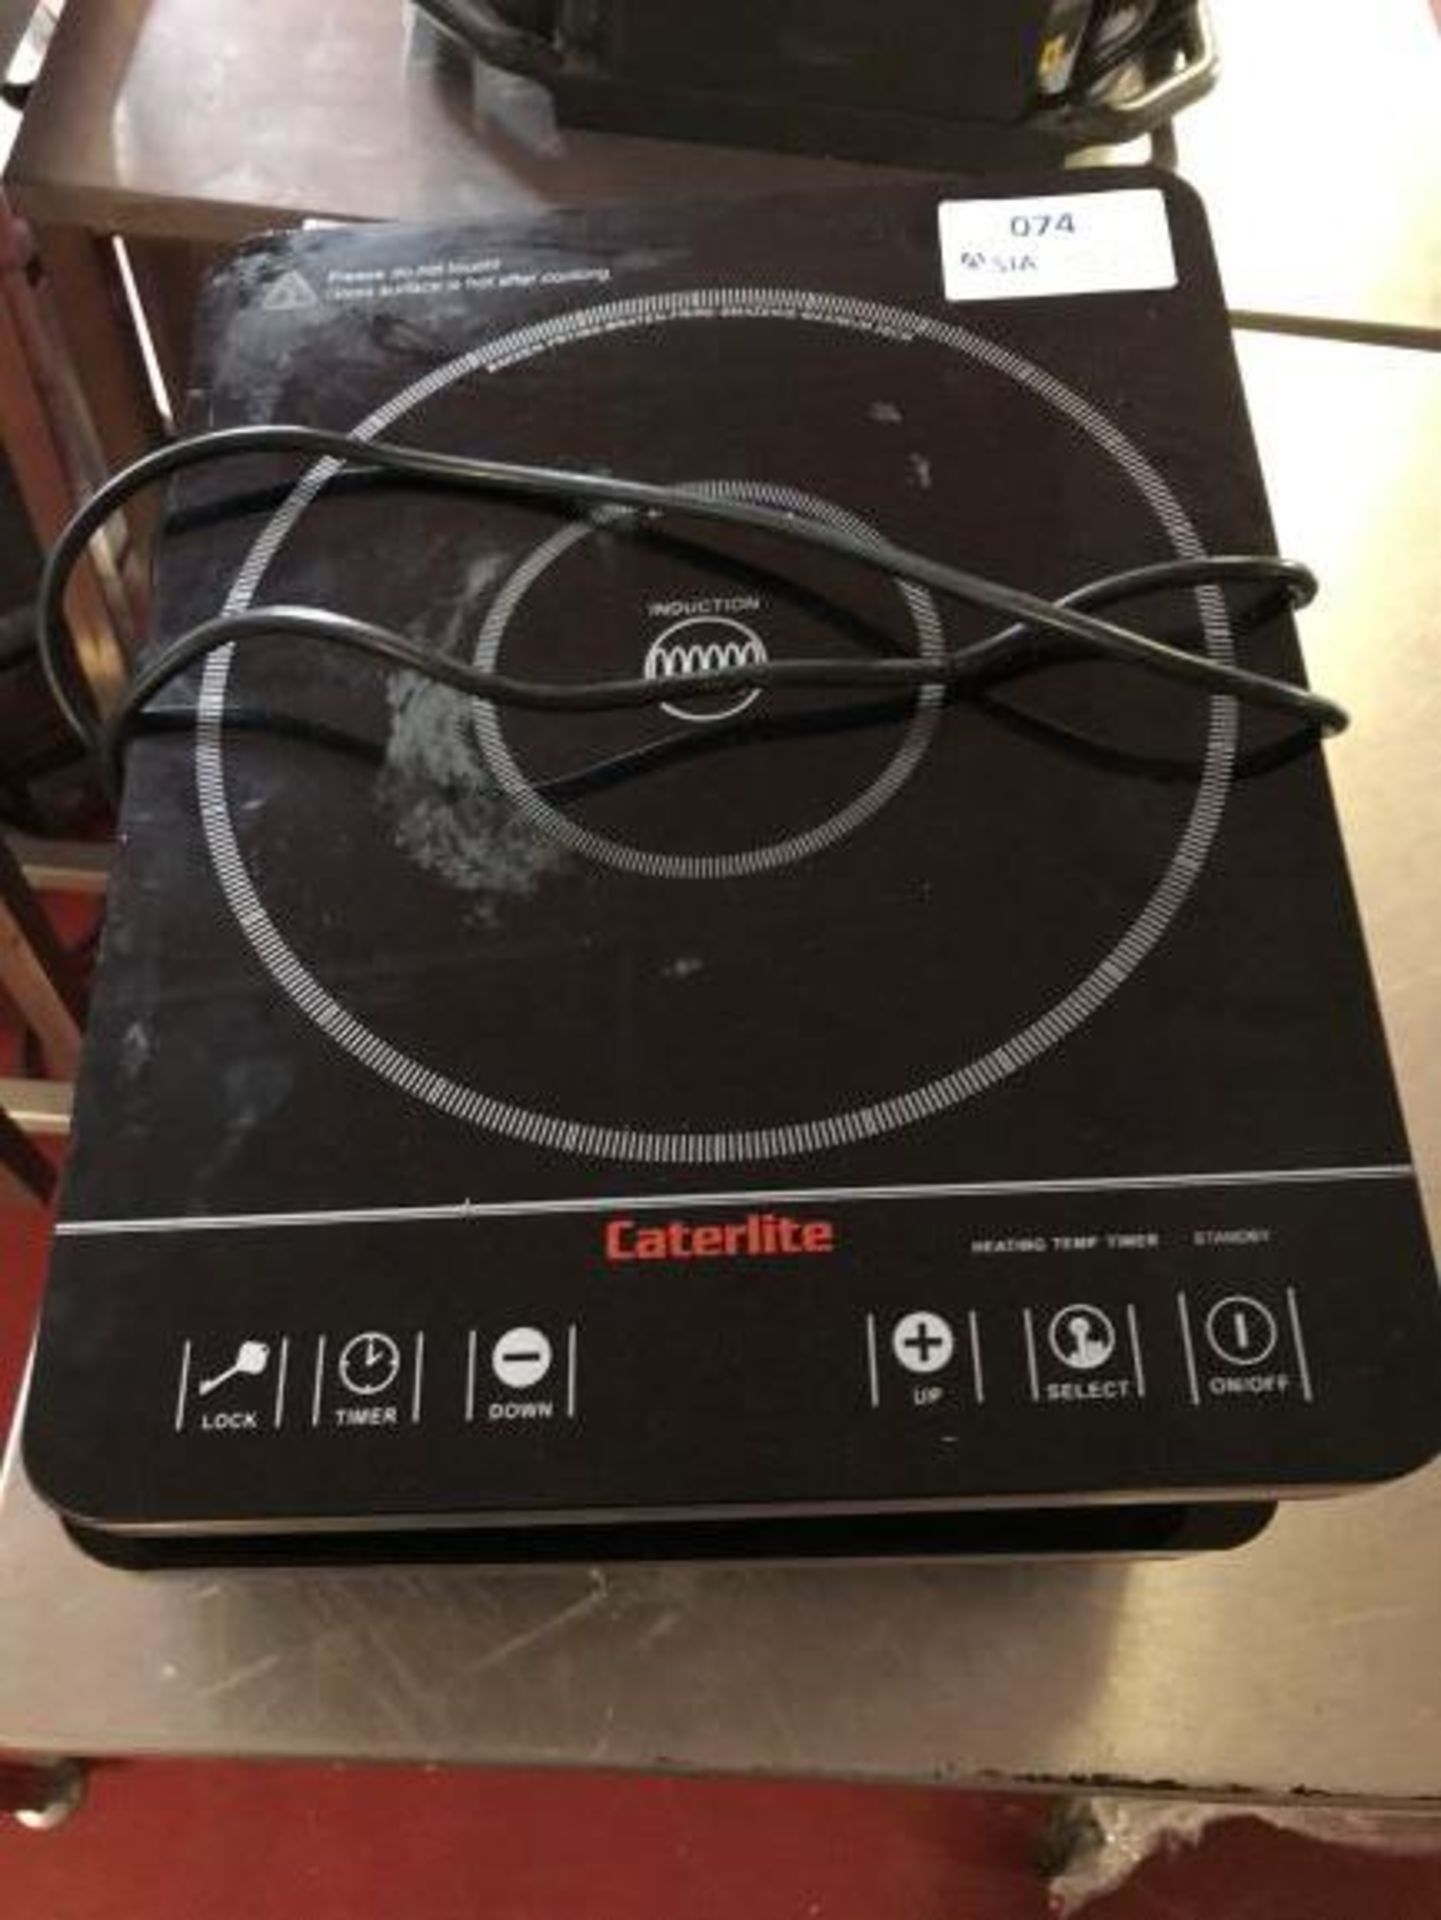 (3) Caterlite CM352 electric induction hobs